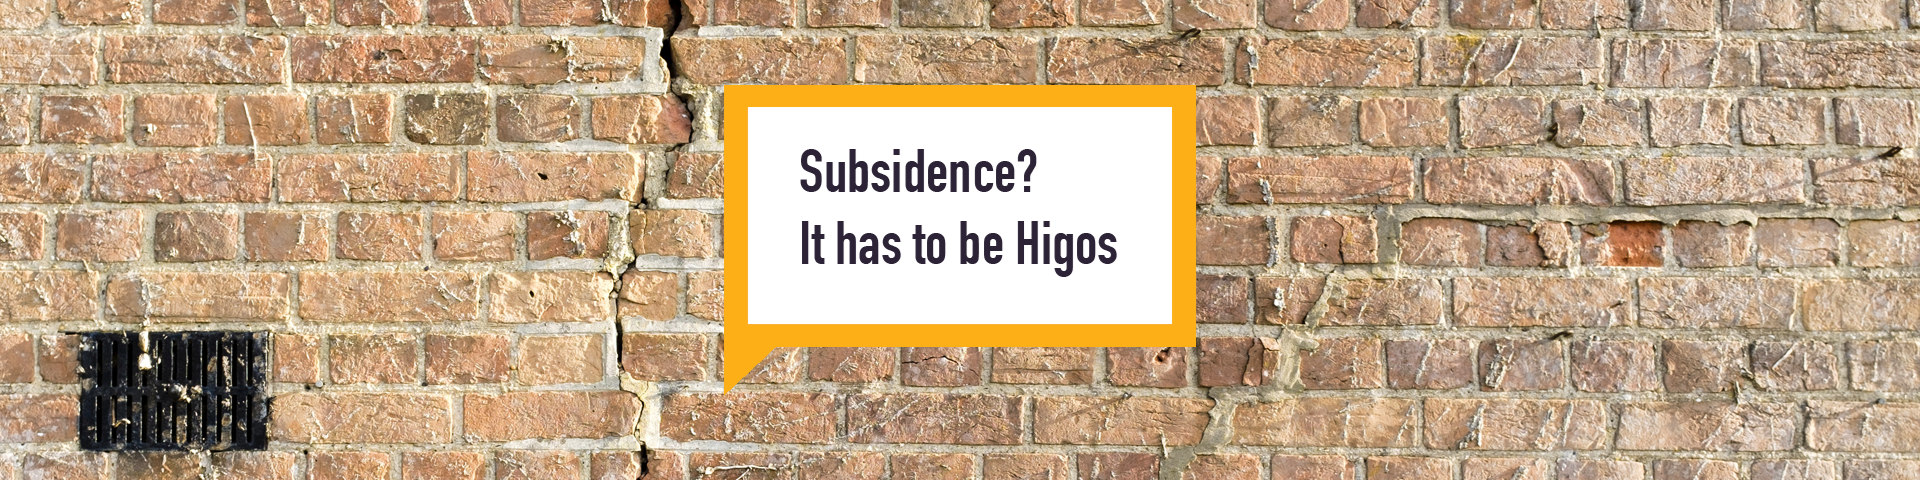 Higos Personal insurance subsidence